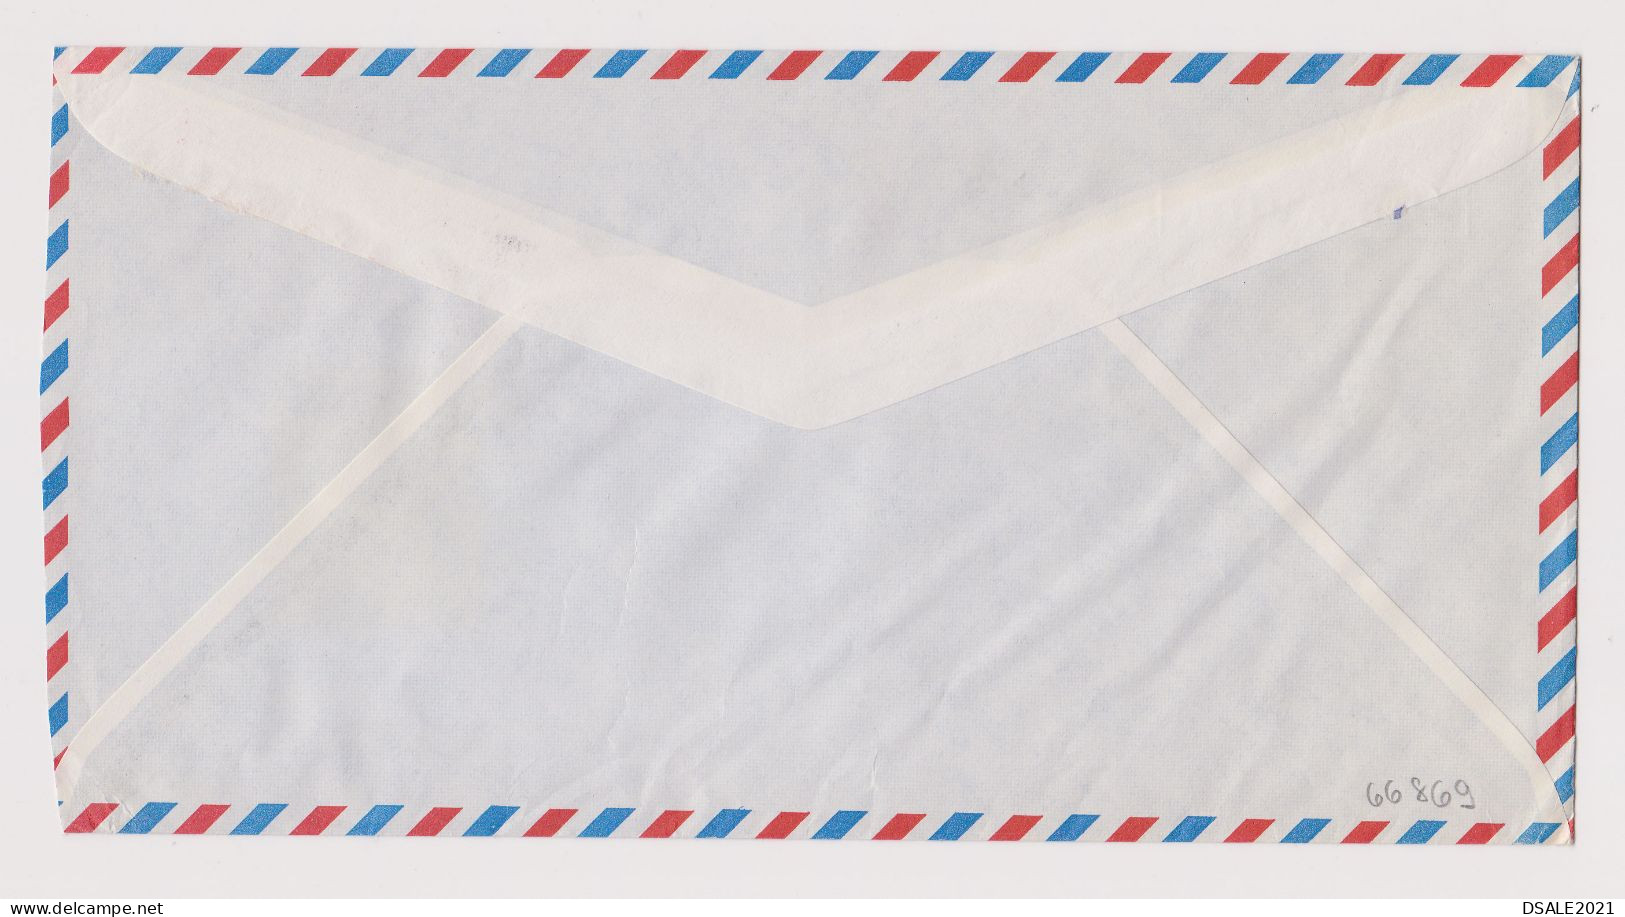 Spain Espana 1980s Airmail Commerce Window Cover With EMA METER Machine Stamp GERMAN PEREZ CARRASCO, Sent Abroad /66869 - Machine Labels [ATM]